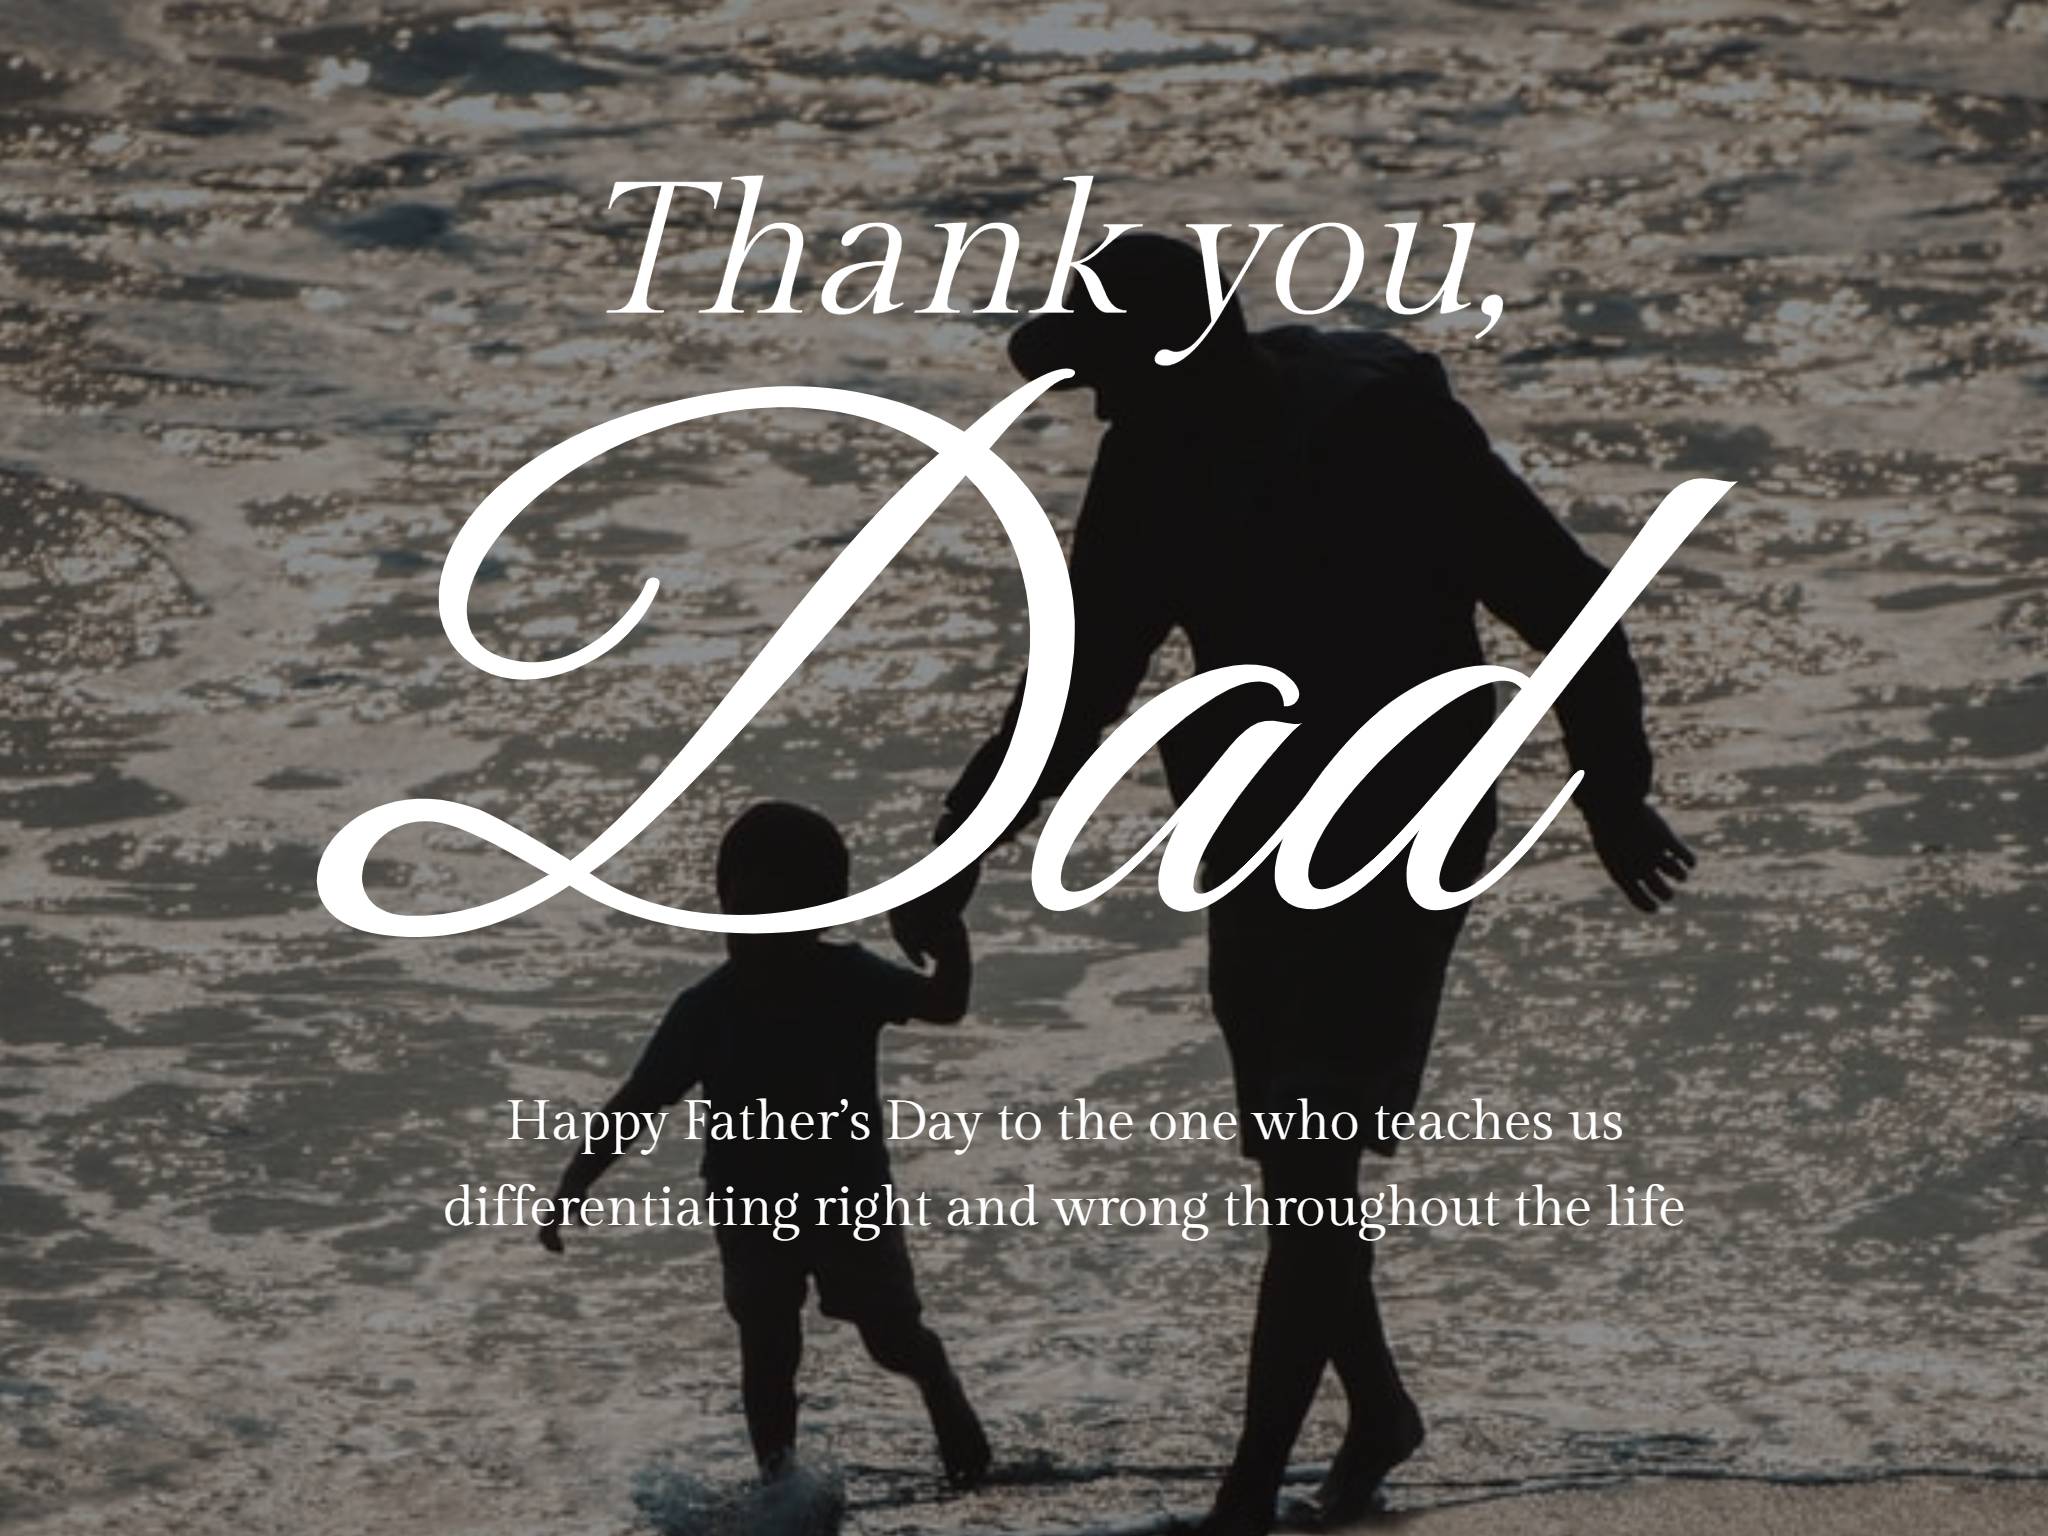 Wish Dad a Happy Father's Day With These Heartfelt Sayings